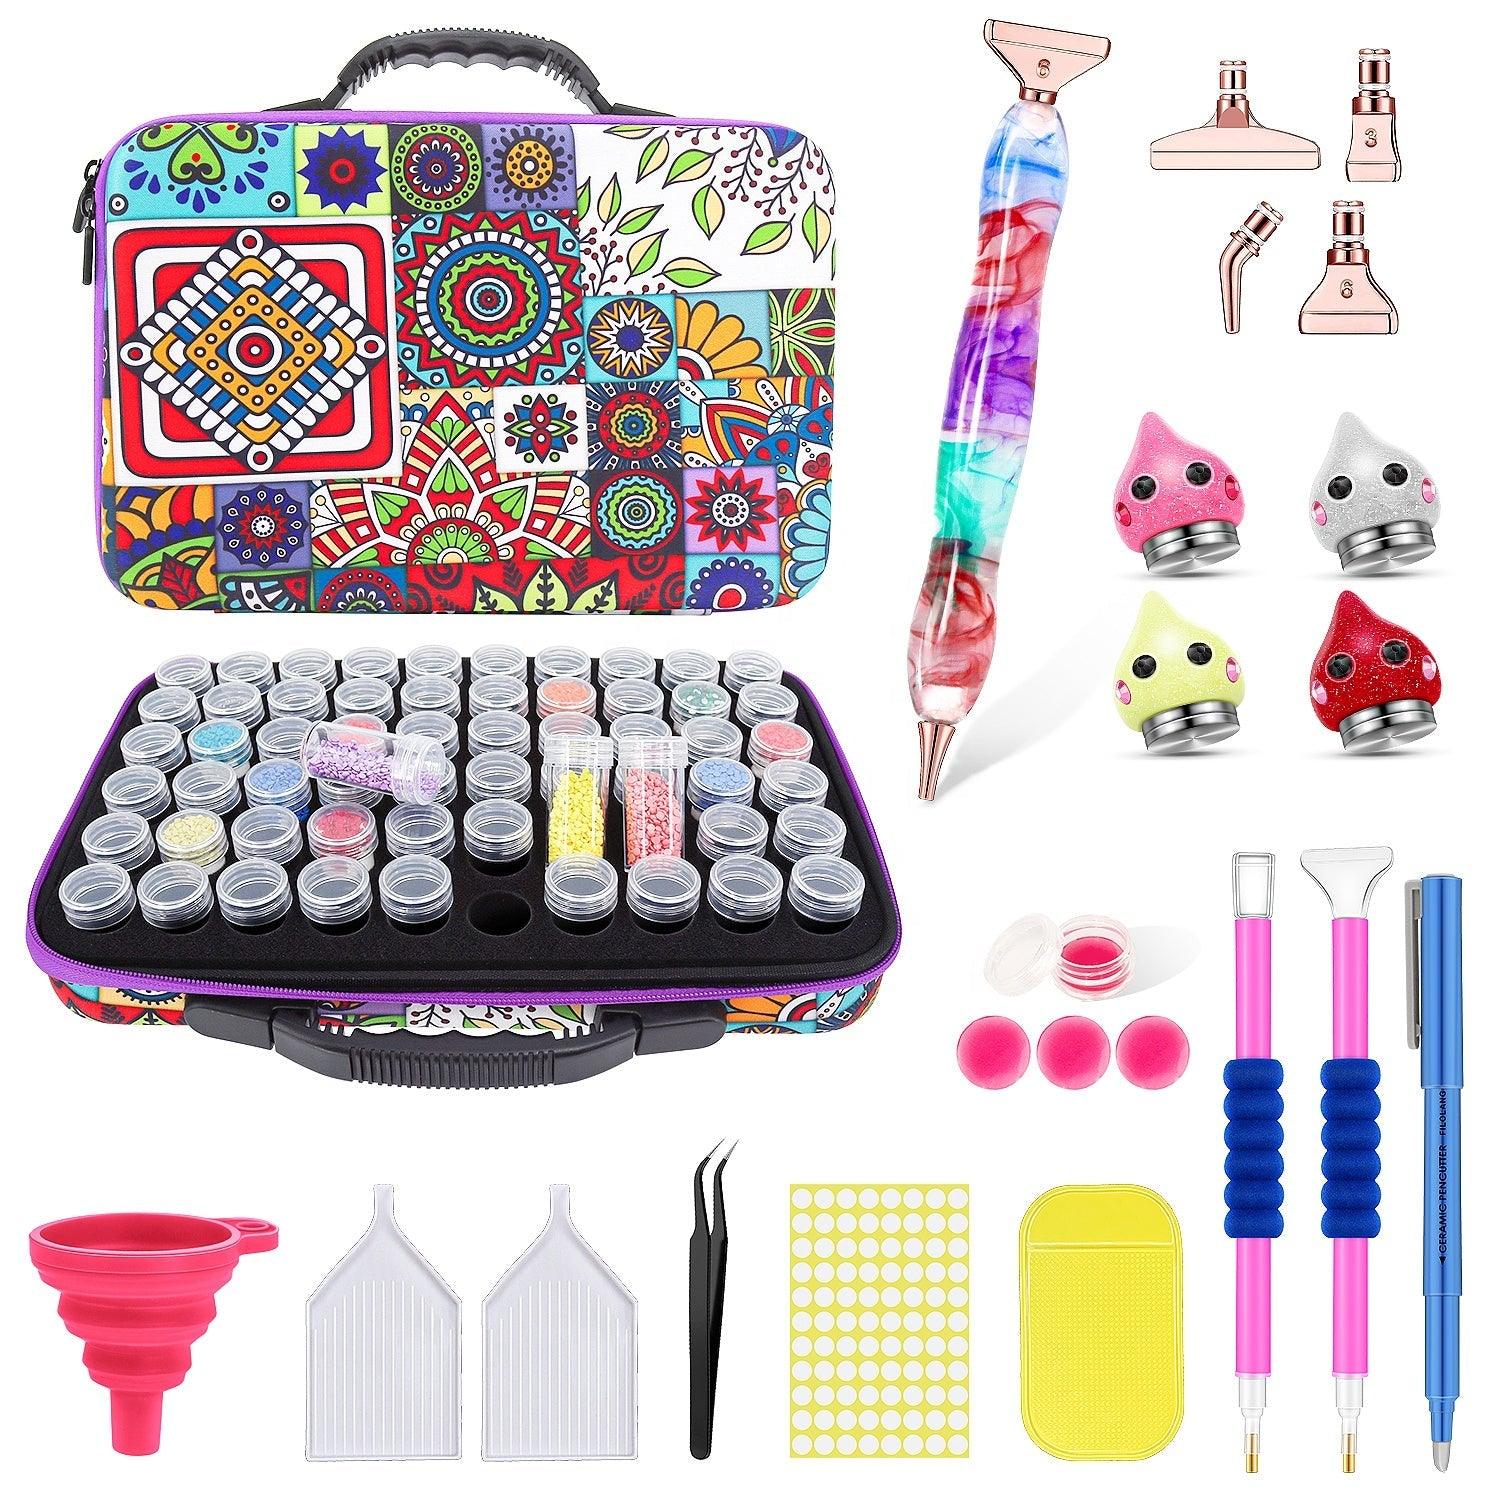 Artistic 80 in 1 Diamond Painting Tool Kits Storage Container